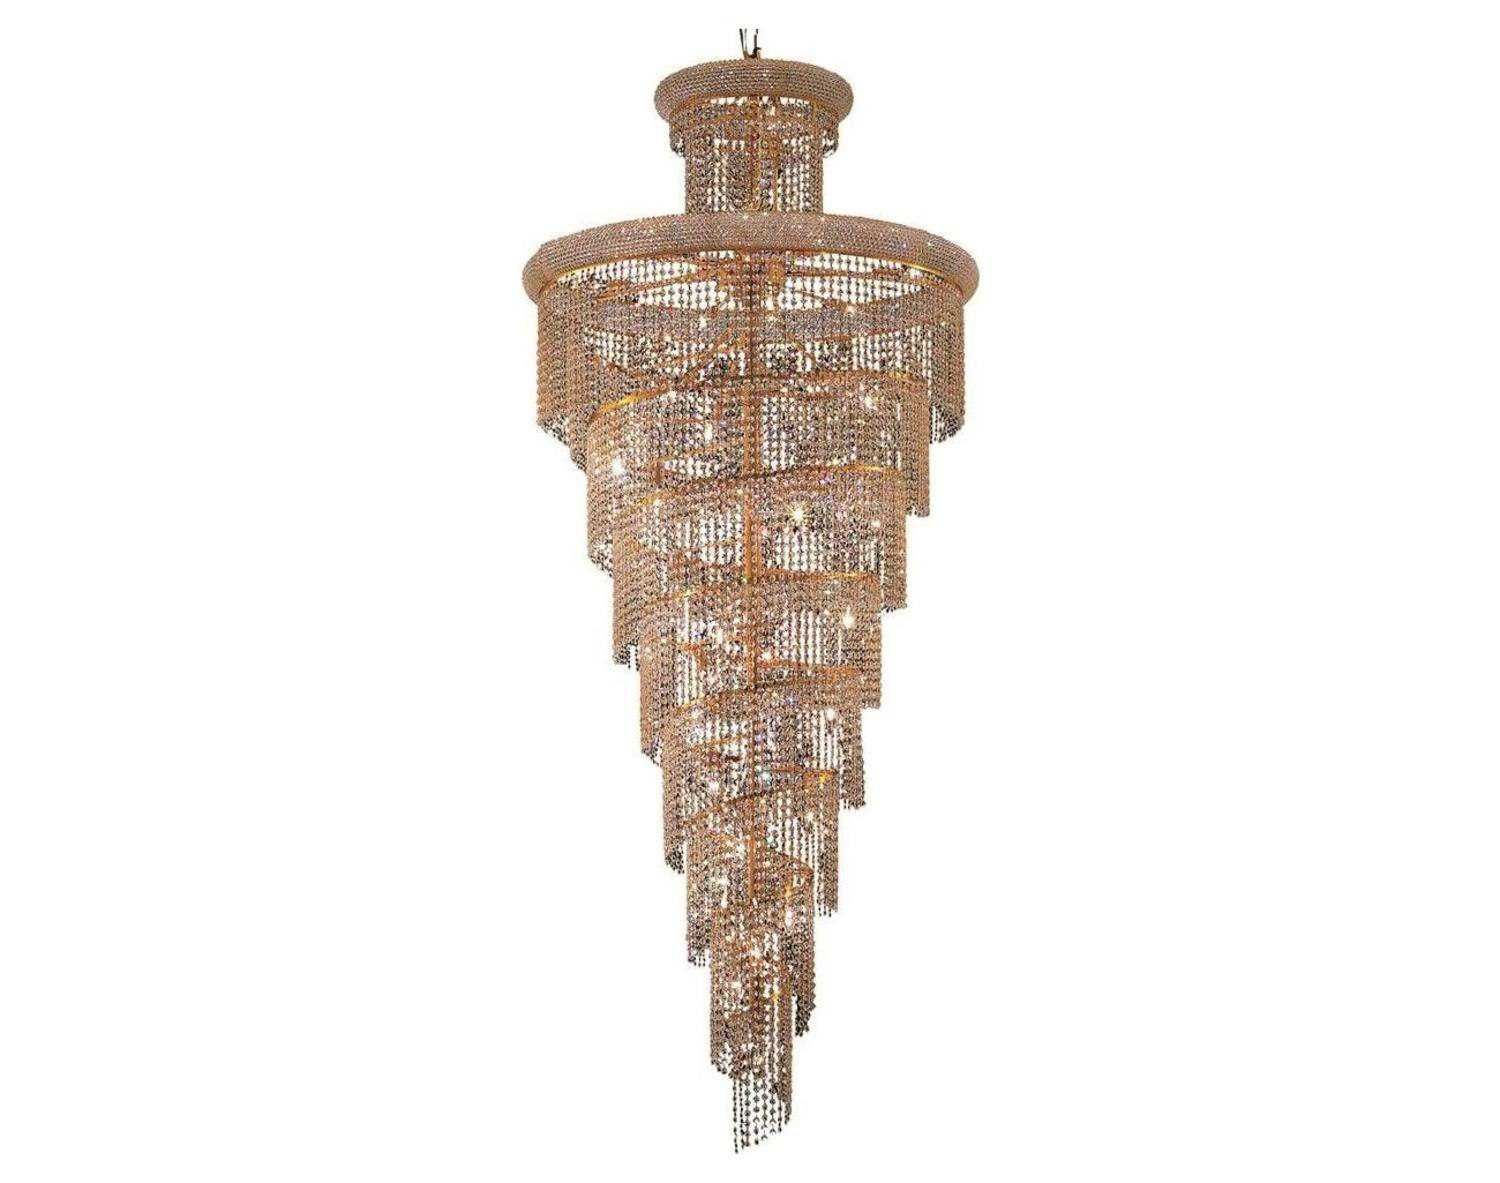 Elegant Lighting Spiral Royal Cut Gold & Crystal 32 Light For Royal Cut Crystal Chandeliers (View 10 of 15)